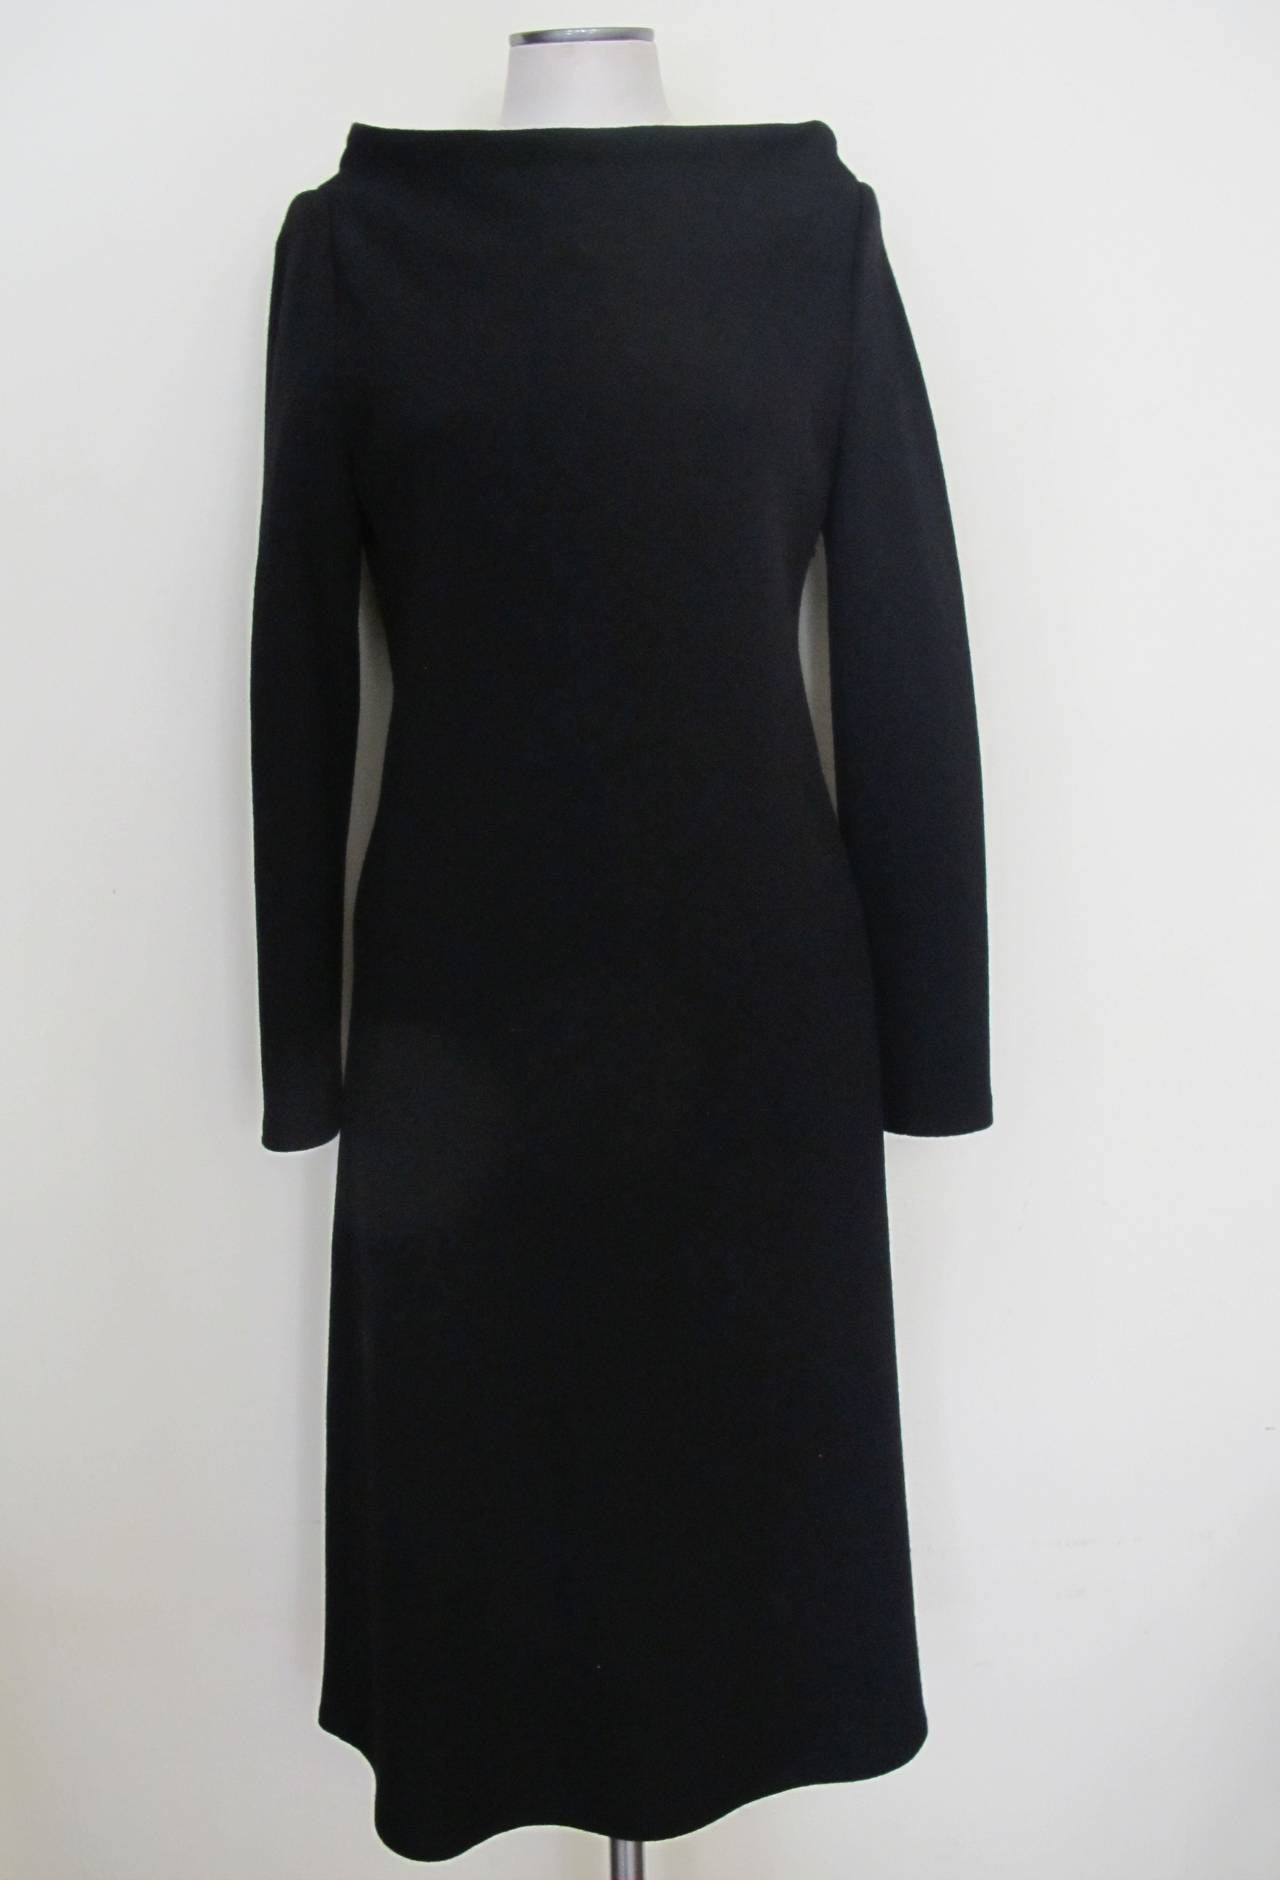 The neckline of this day or cocktail dress is exquisite and is a variation of the bateau (boat style) neckline. This A-Line silhouette fits divinely on the body. Barbara Schwarzer designed for Bergdorf Goodman for a few years. Sleeve length measures